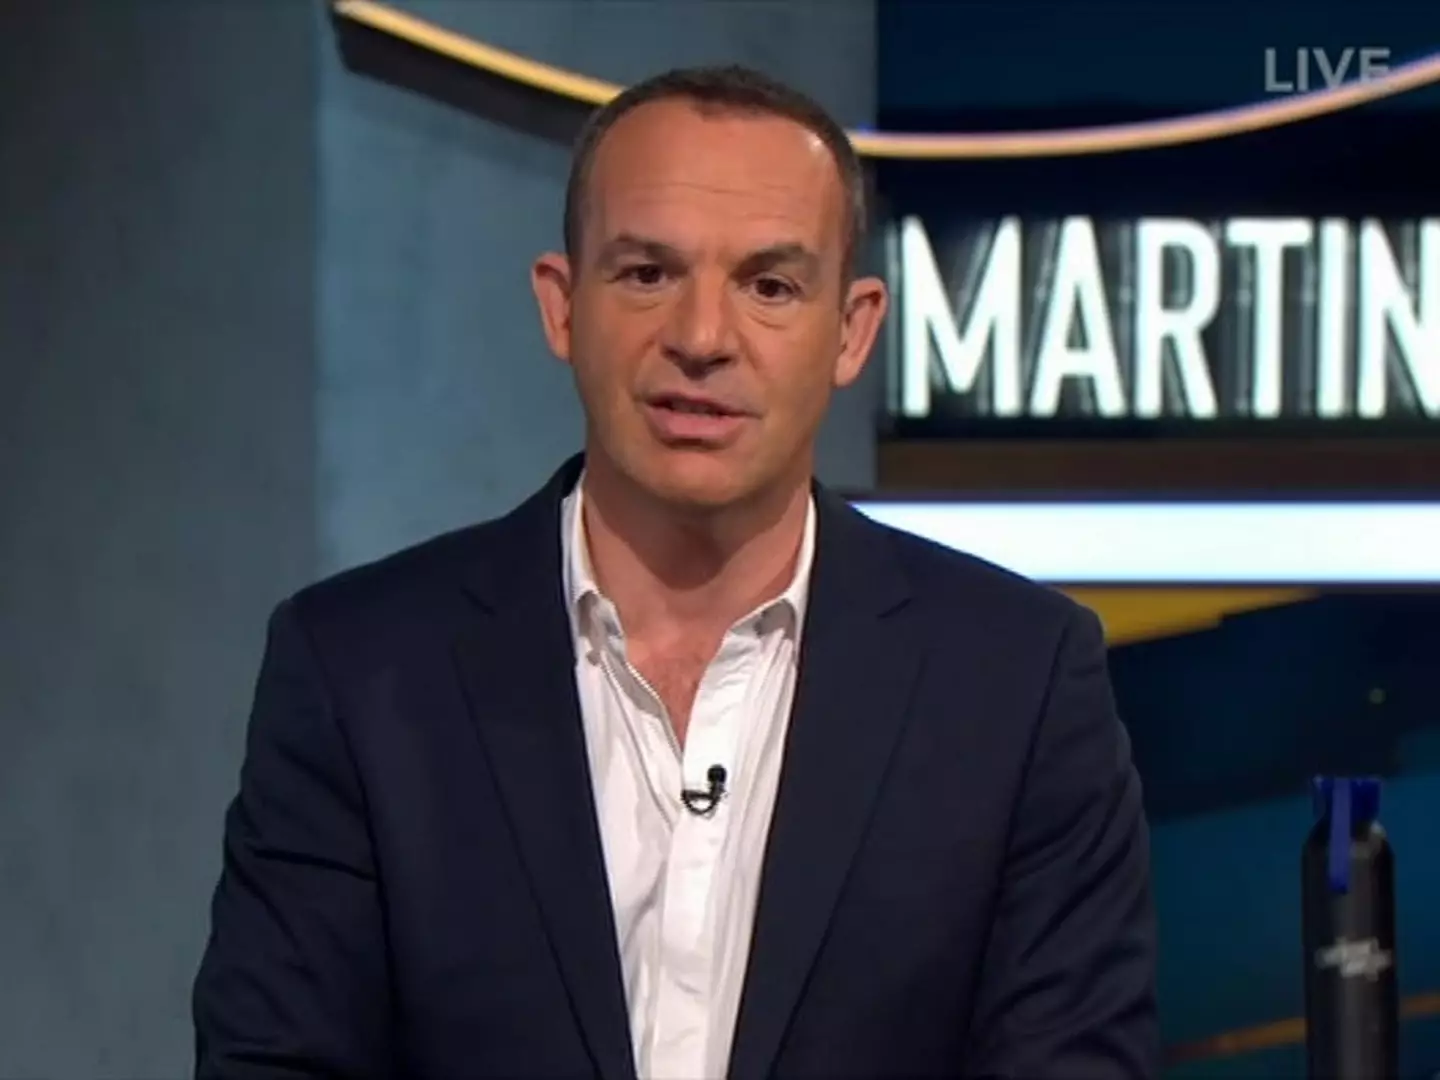 Martin Lewis tried to answer the man's question as best as he could.